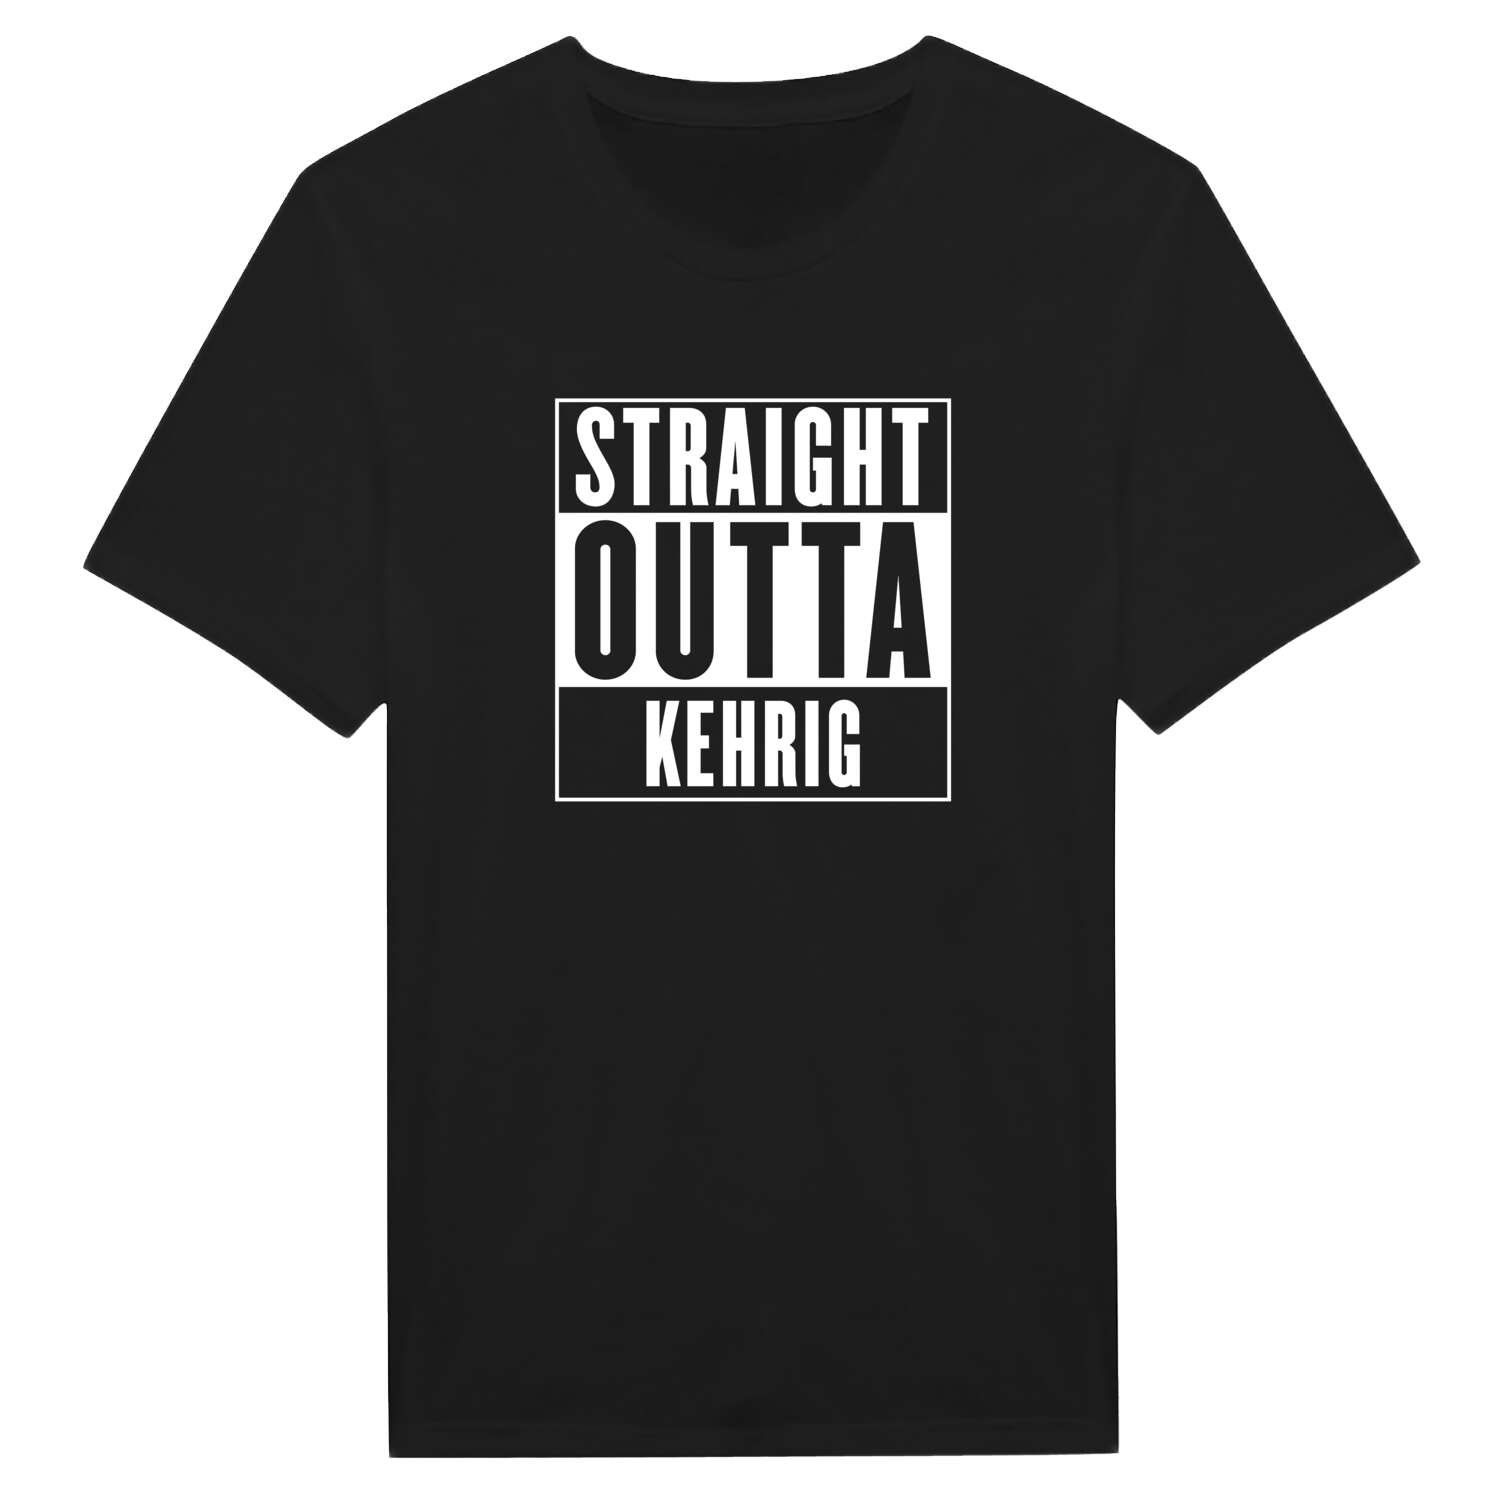 Kehrig T-Shirt »Straight Outta«